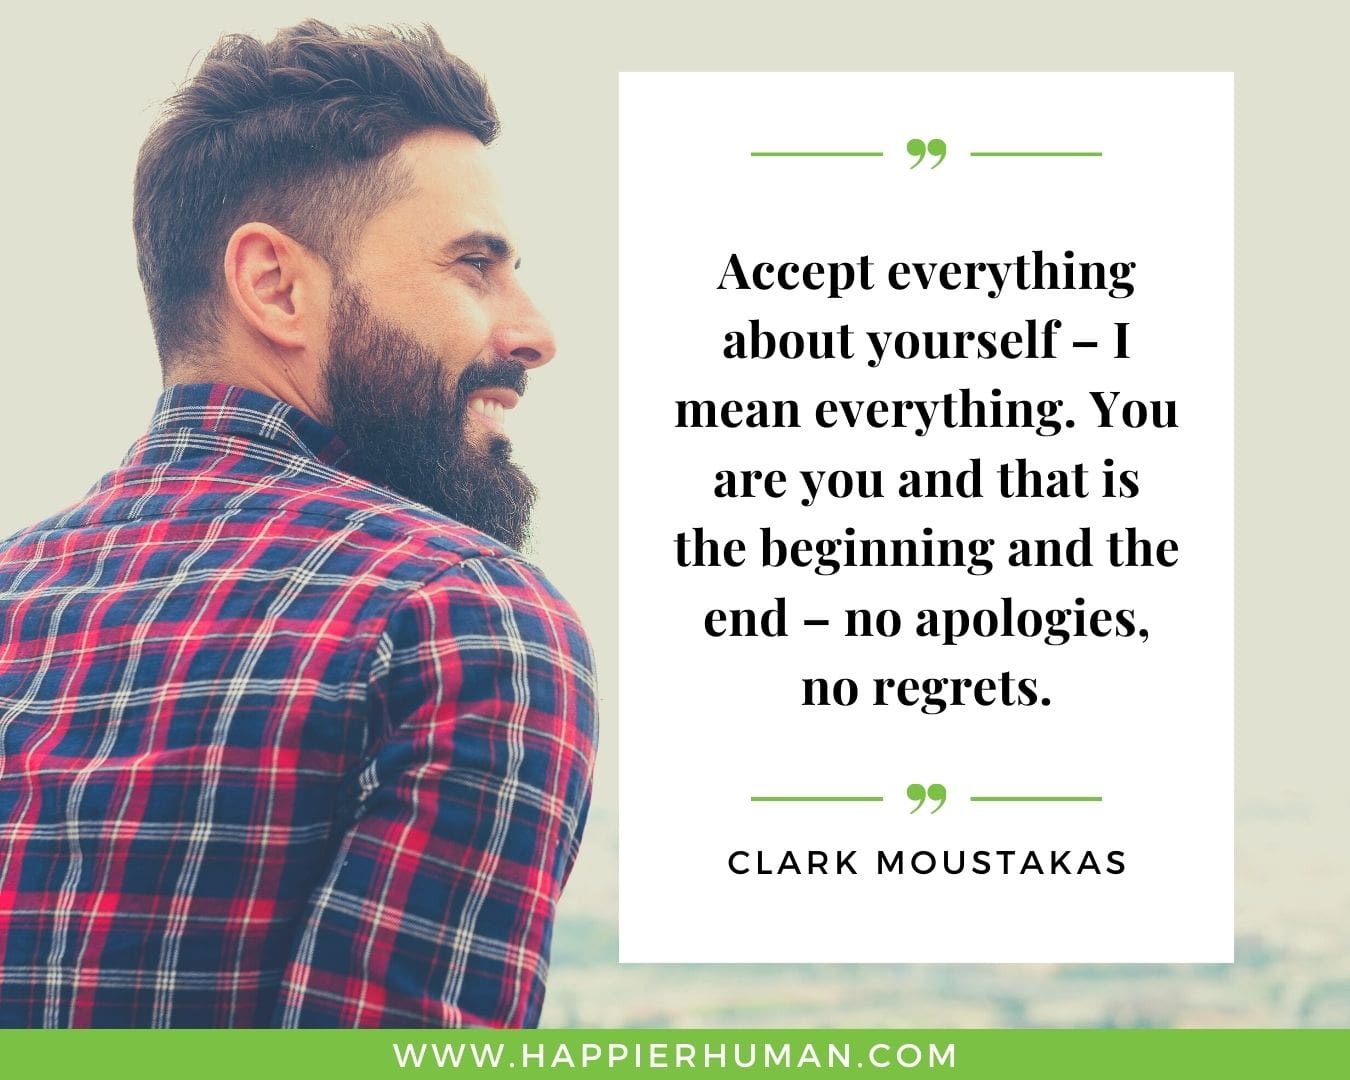 Introvert Quotes - “Accept everything about yourself – I mean everything. You are you and that is the beginning and the end – no apologies, no regrets.” – Clark Moustakas